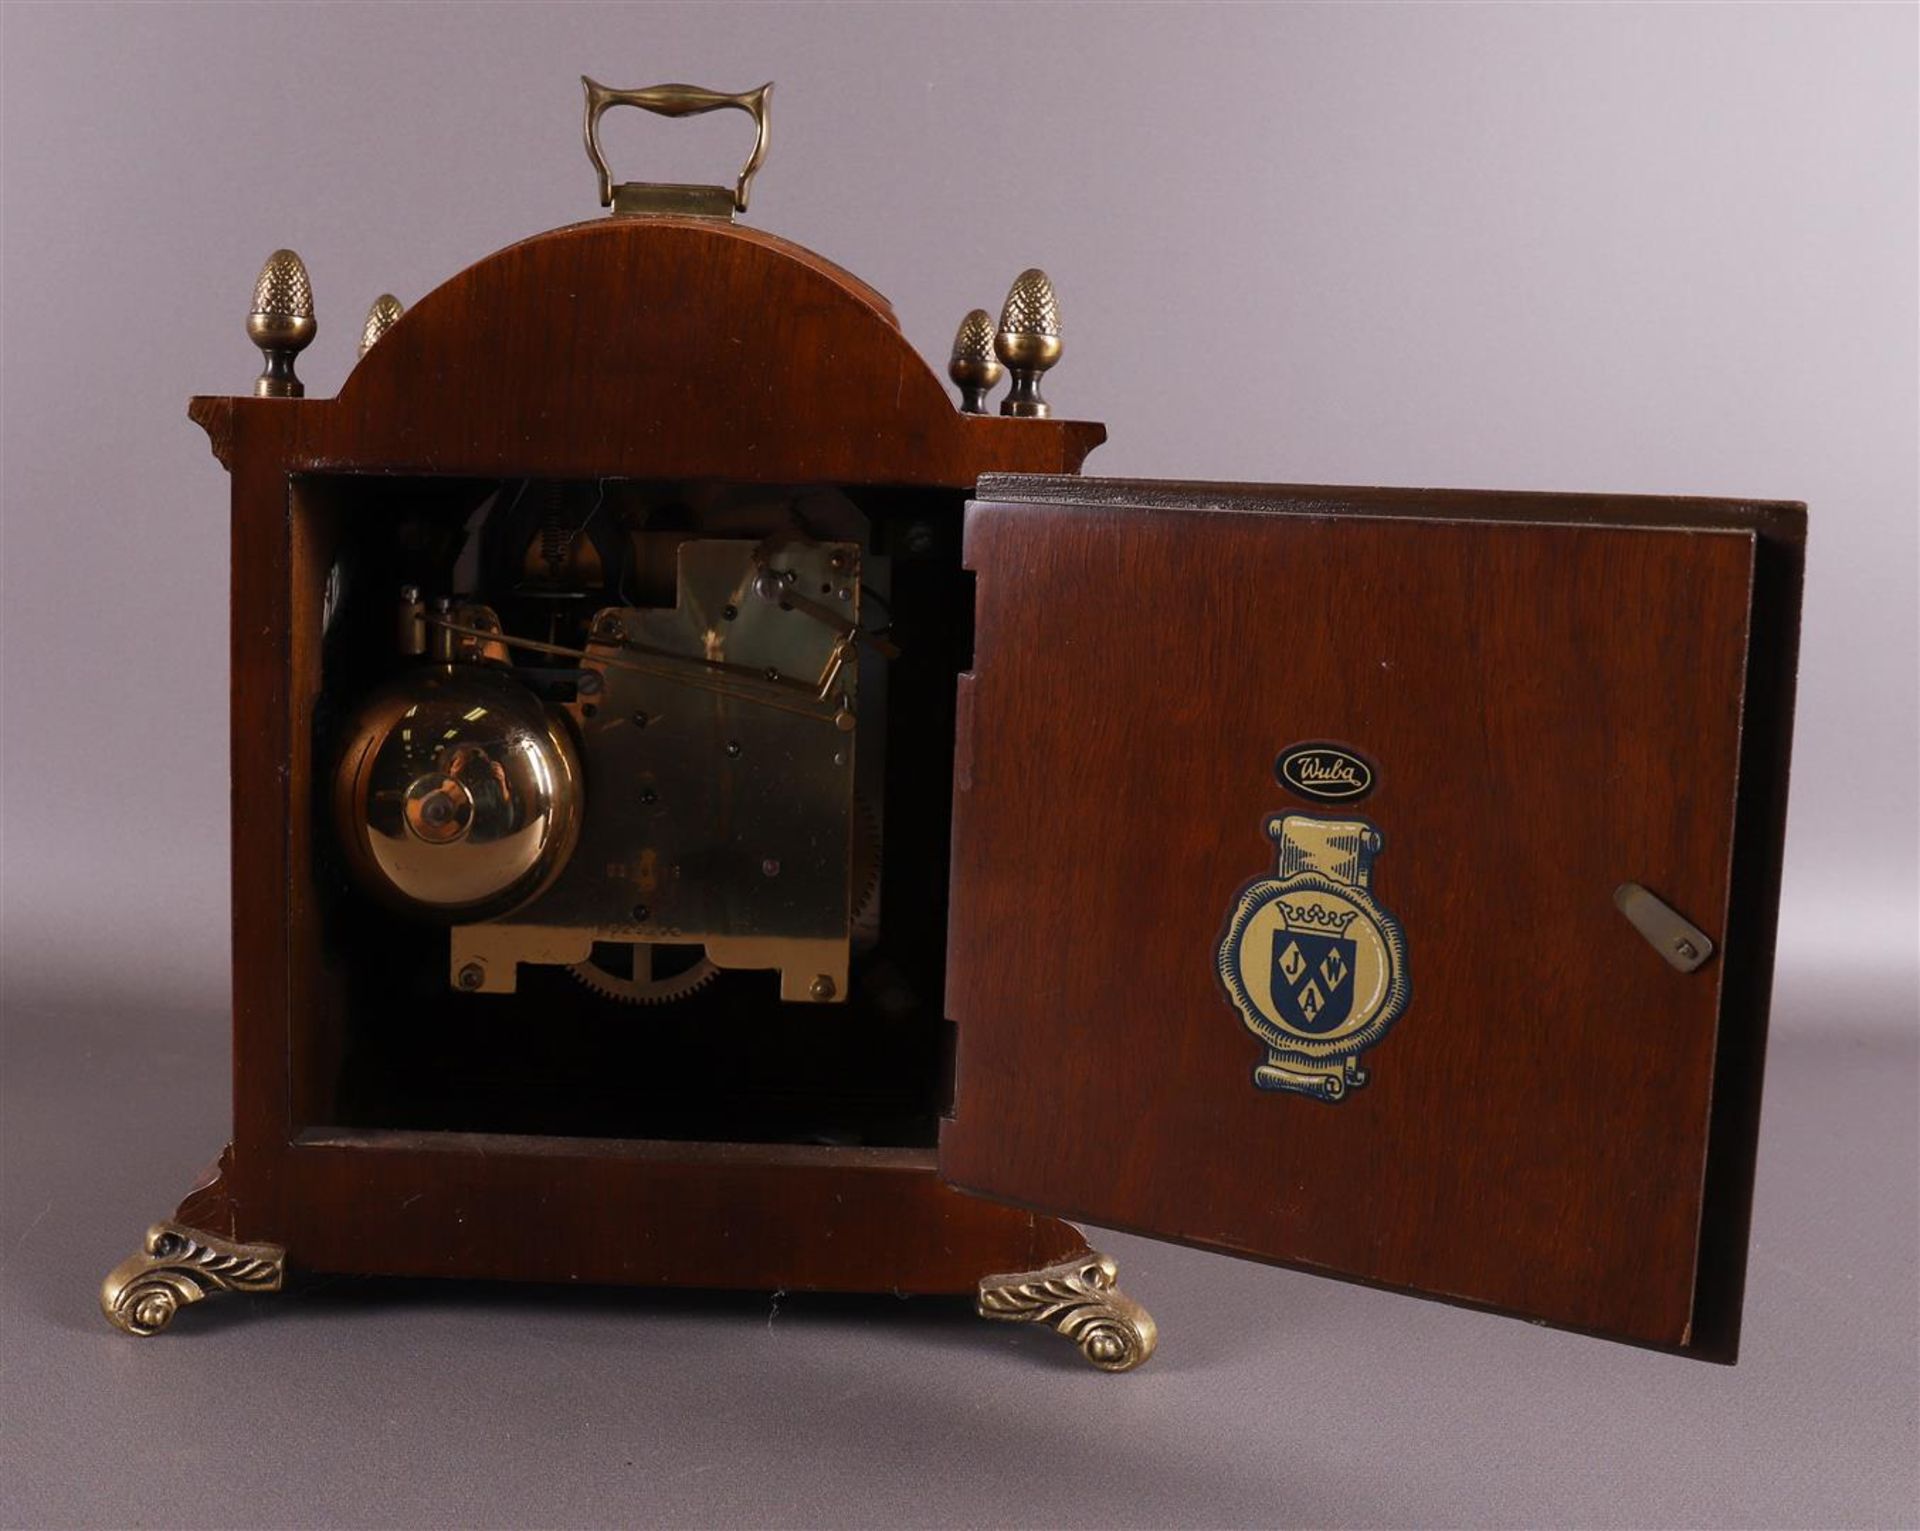 A table clock in burr walnut case, 2nd half 20th century. - Image 6 of 6